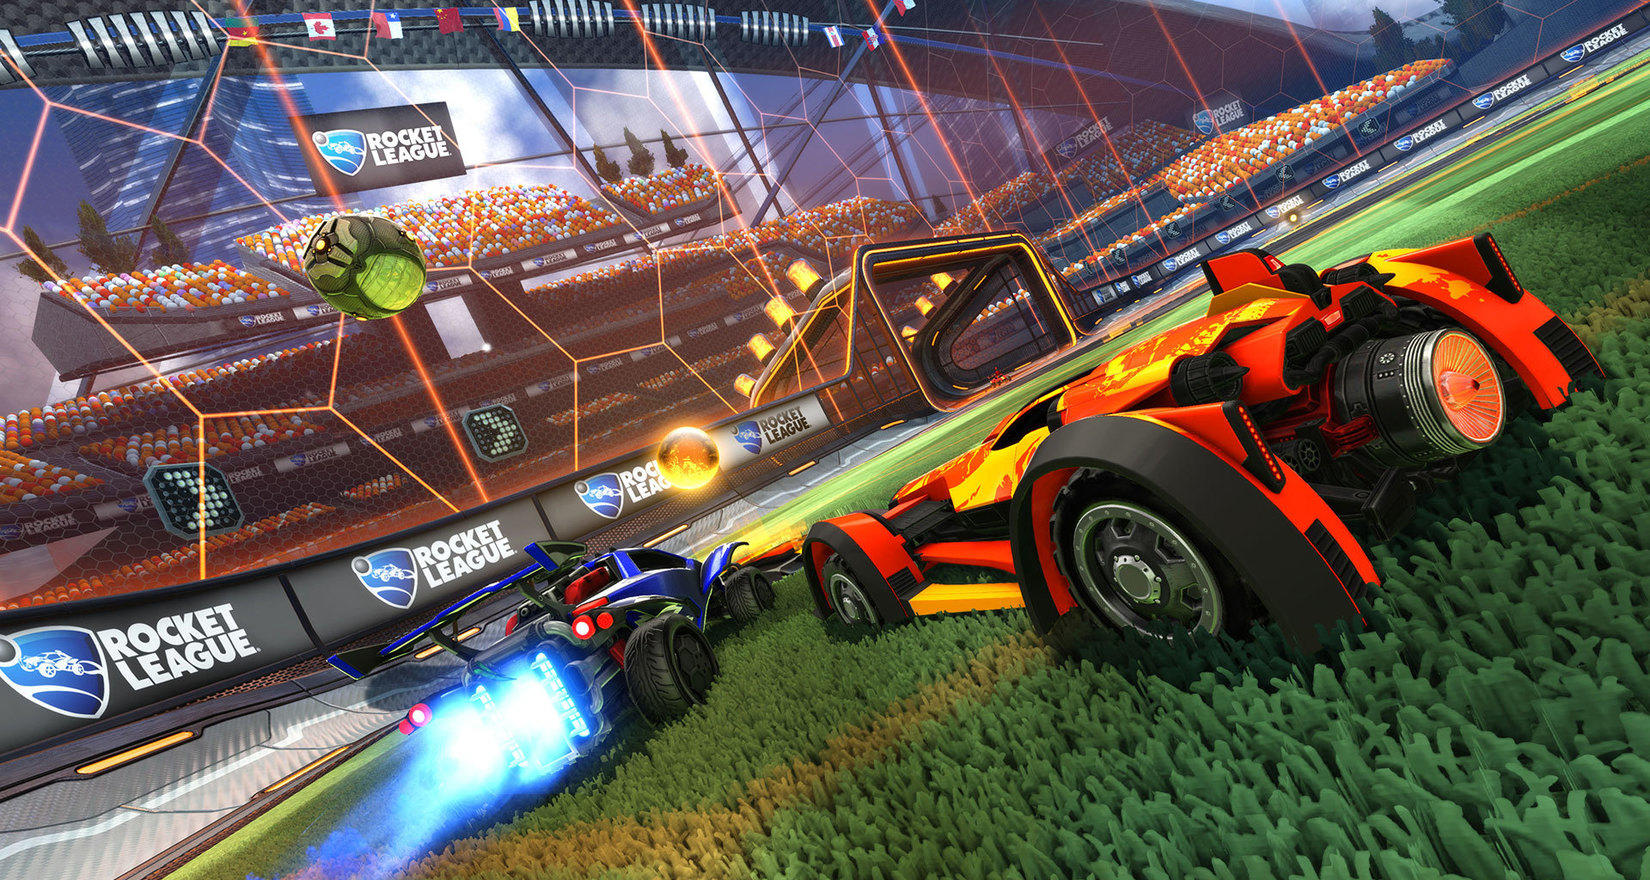 Rocket League February Update Details and 2018 Spring Roadmap On Tournaments